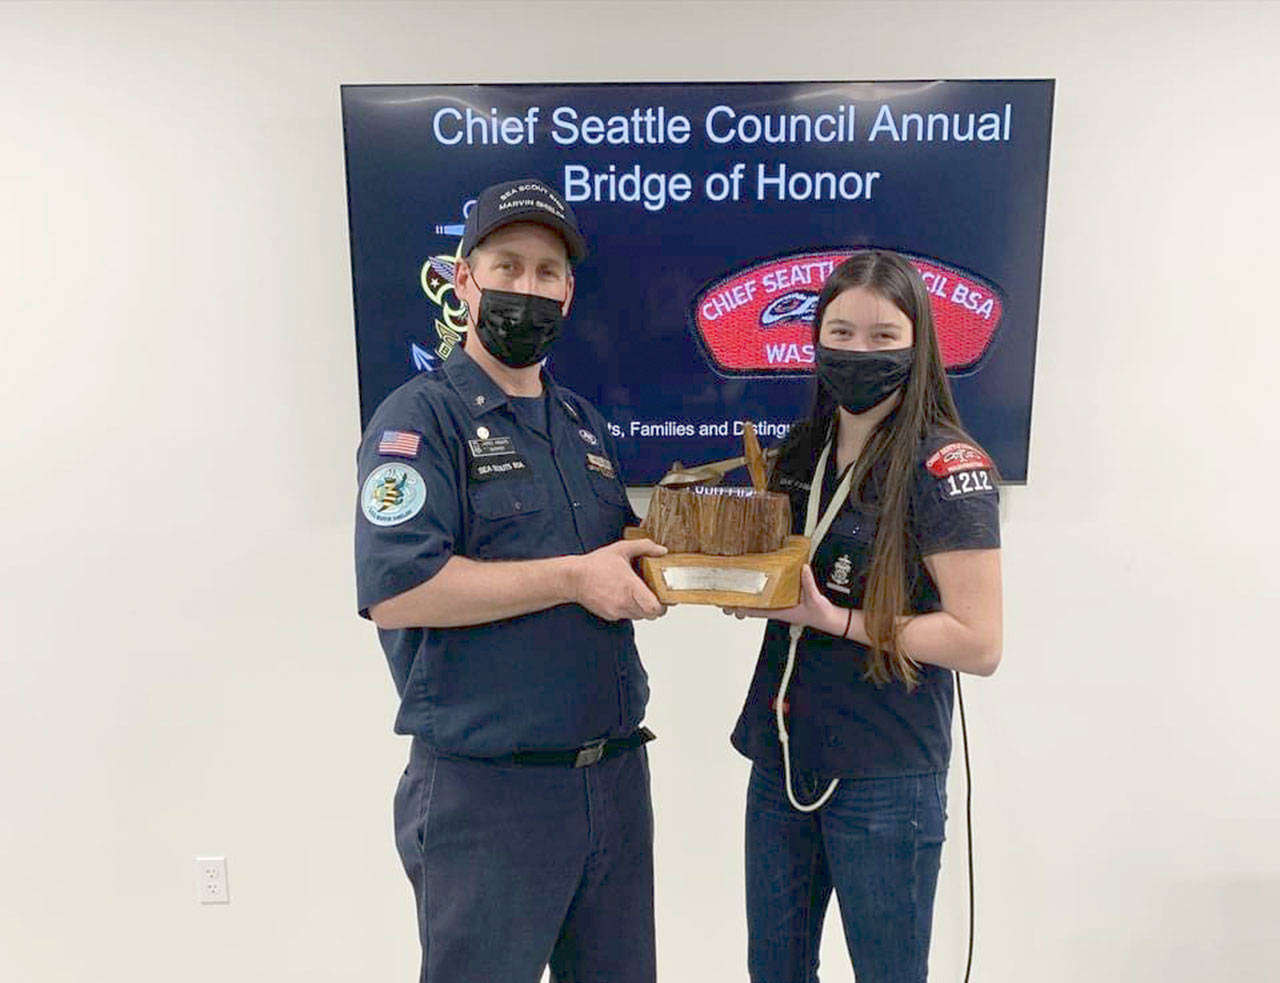 Skipper Jared Minard, left, and Ella Ventura, boatswain, accept the Hiltner Trophy for Sea Scout Ship Marvin Shields. The Chief Seattle Council named the Sea Scout Ship Marvin Shields, ship 1212, as its fleet flagship during a recent award ceremony. The selection as flagship allows the Marvin Shields to retain the traveling Hiltner Trophy and fly the flagship pennant at its masthead for the second year. The Sea Scouts is a program for youth ages 14-20. For more information, visit www.seascoutshipmarvinshields.org.